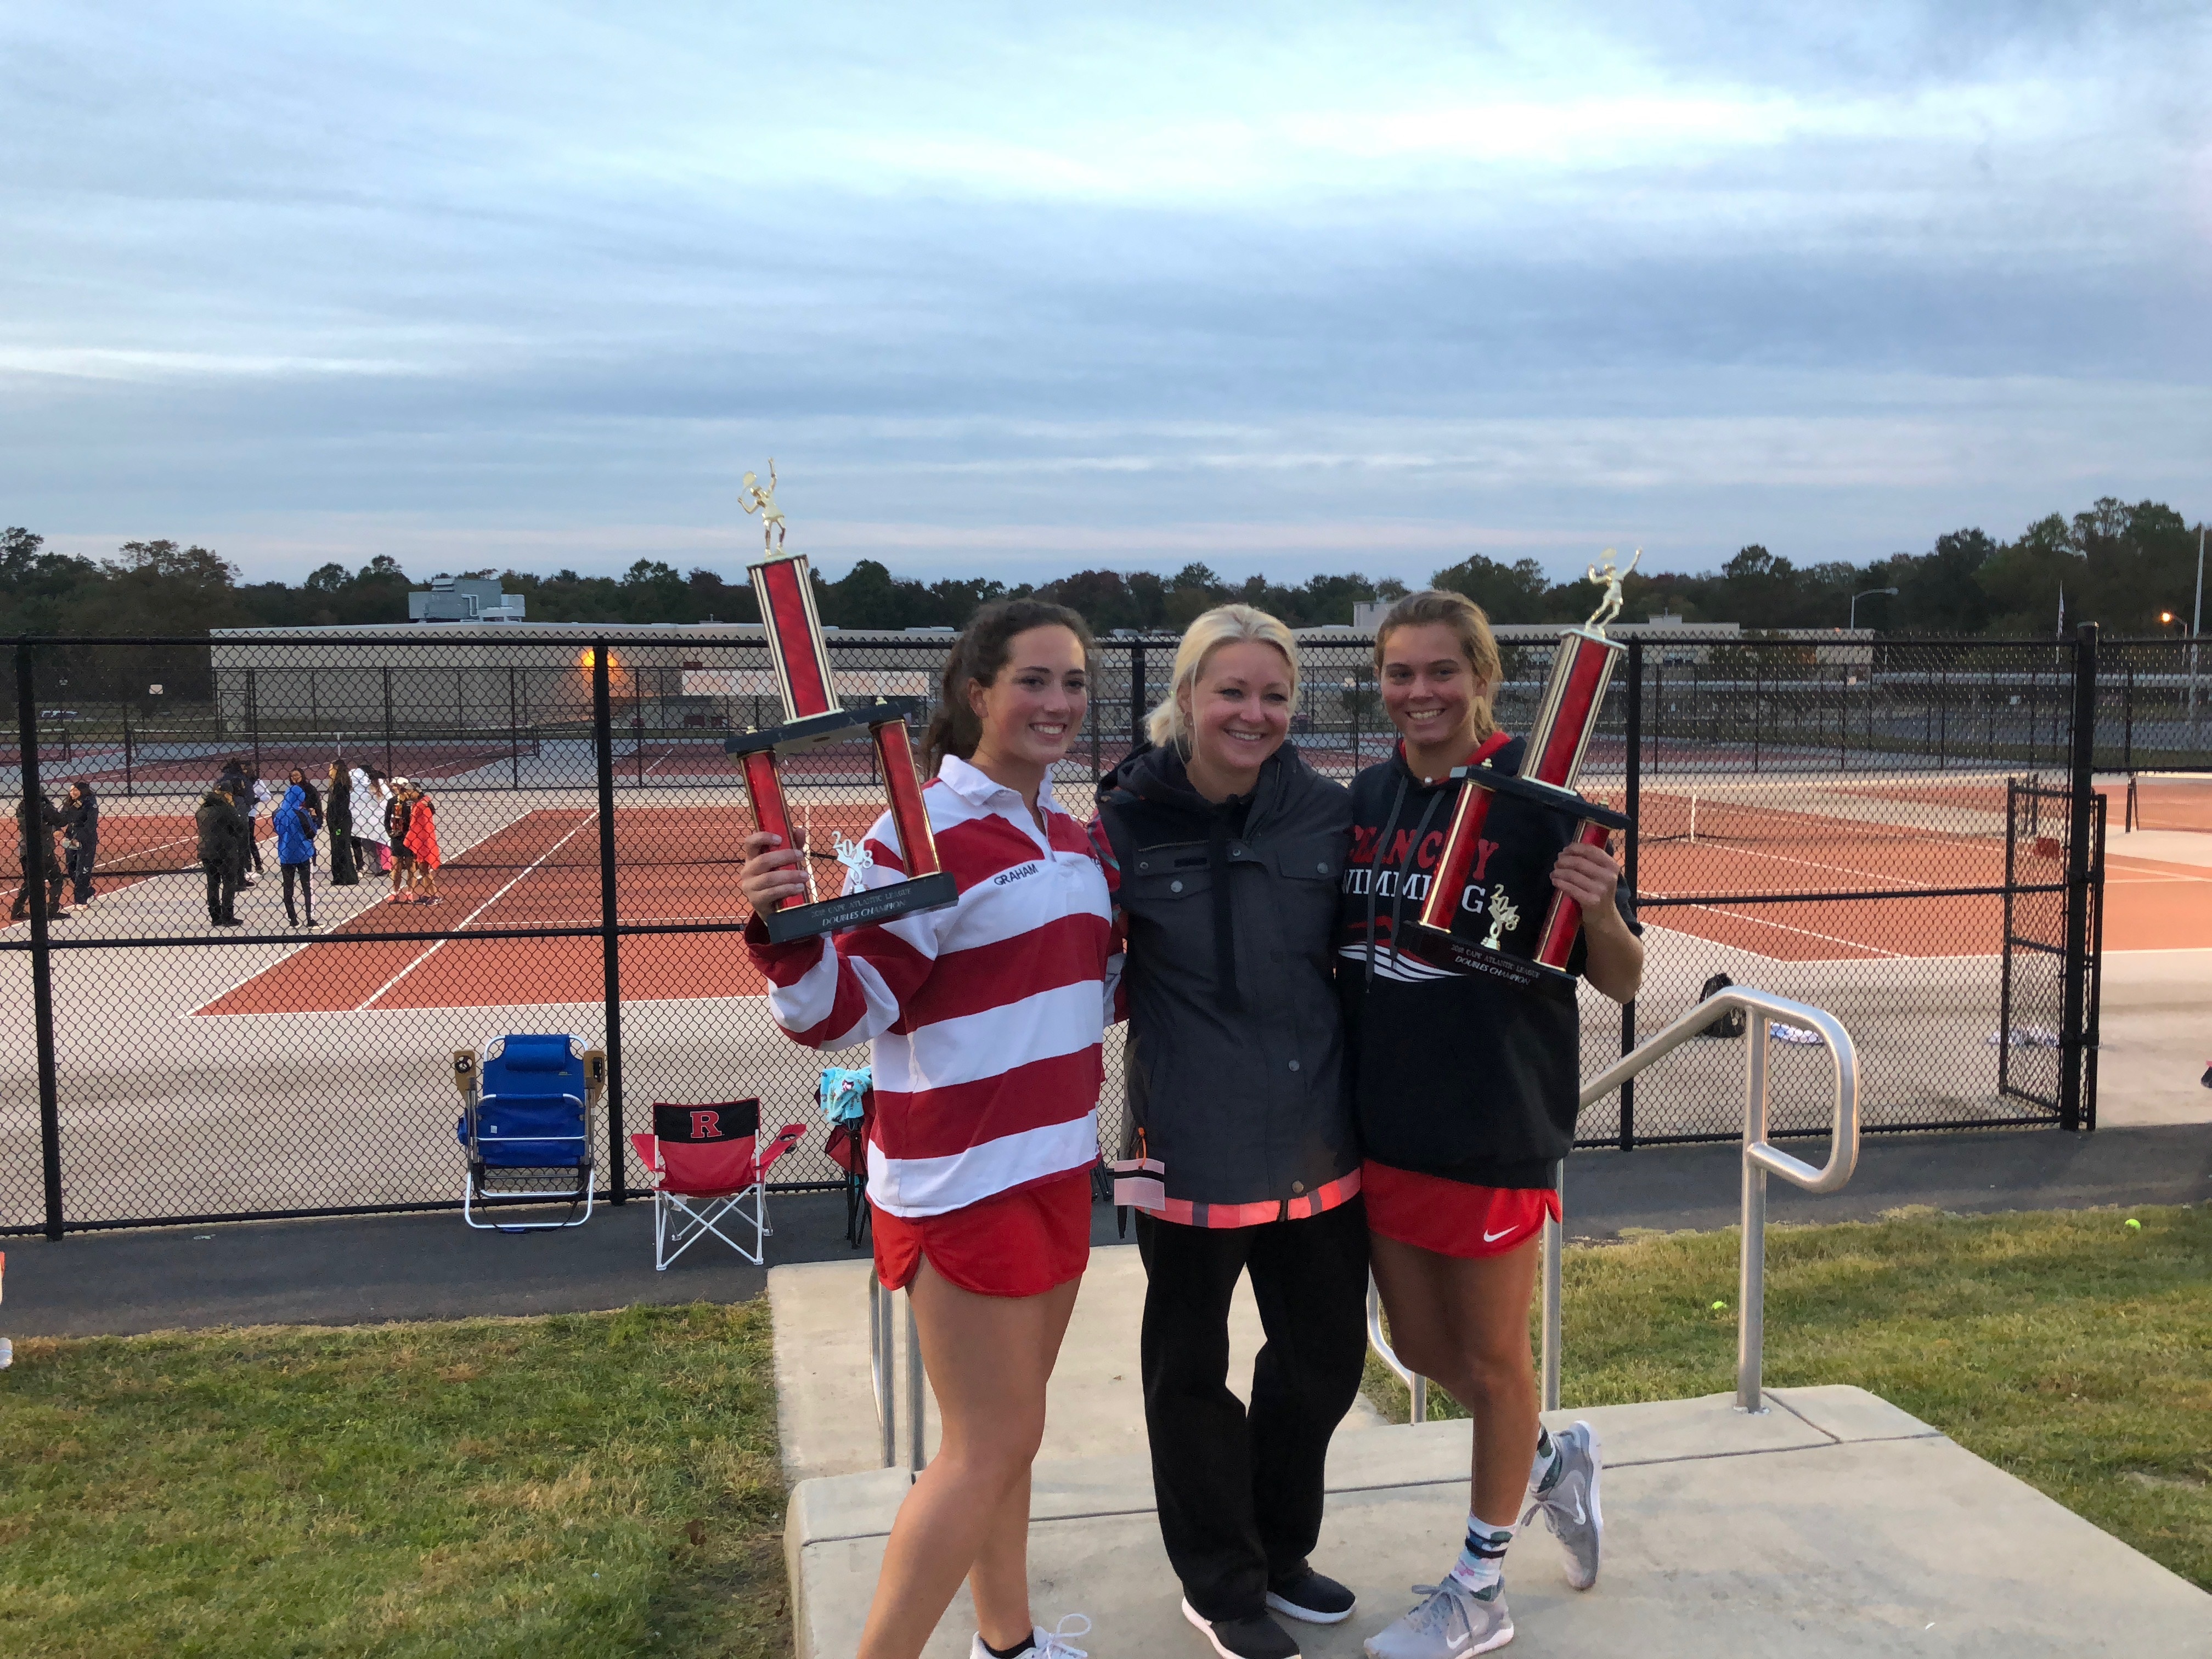 Ocean City High School Tennis Champs are Winners on Court